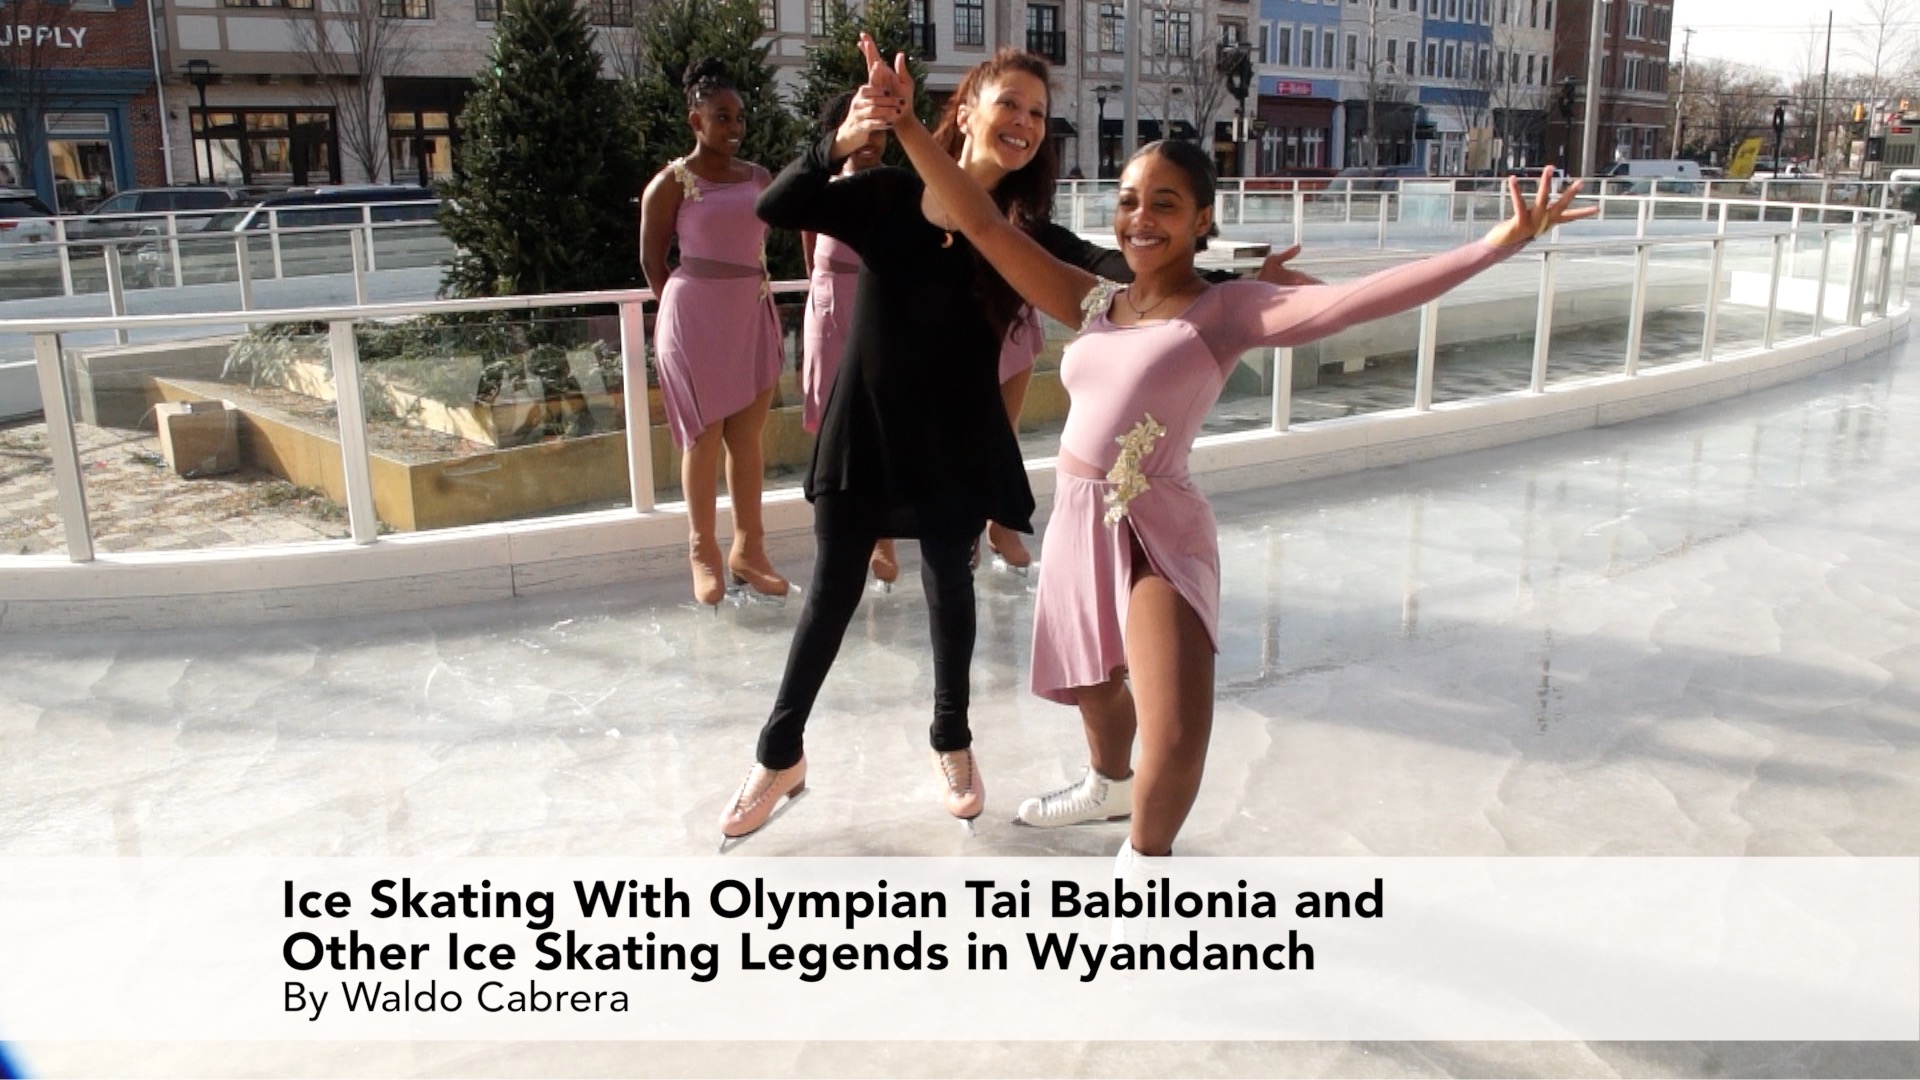 Ice Skating With Olympian Tai Babilonia and Other Ice Skating Legends in Wyandanch